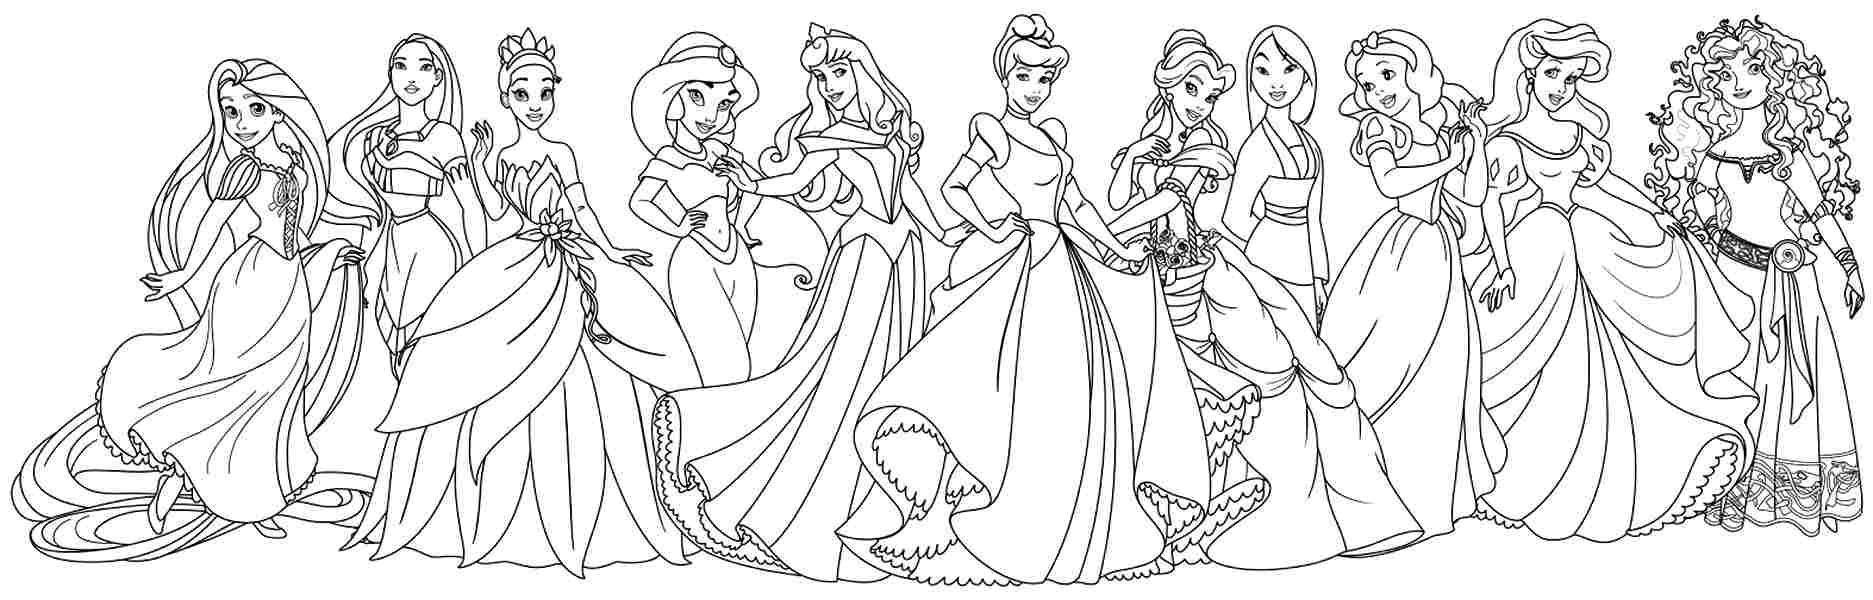 Coloring A number of the disney princesses. Category Disney coloring pages. Tags:  disney, Princess.